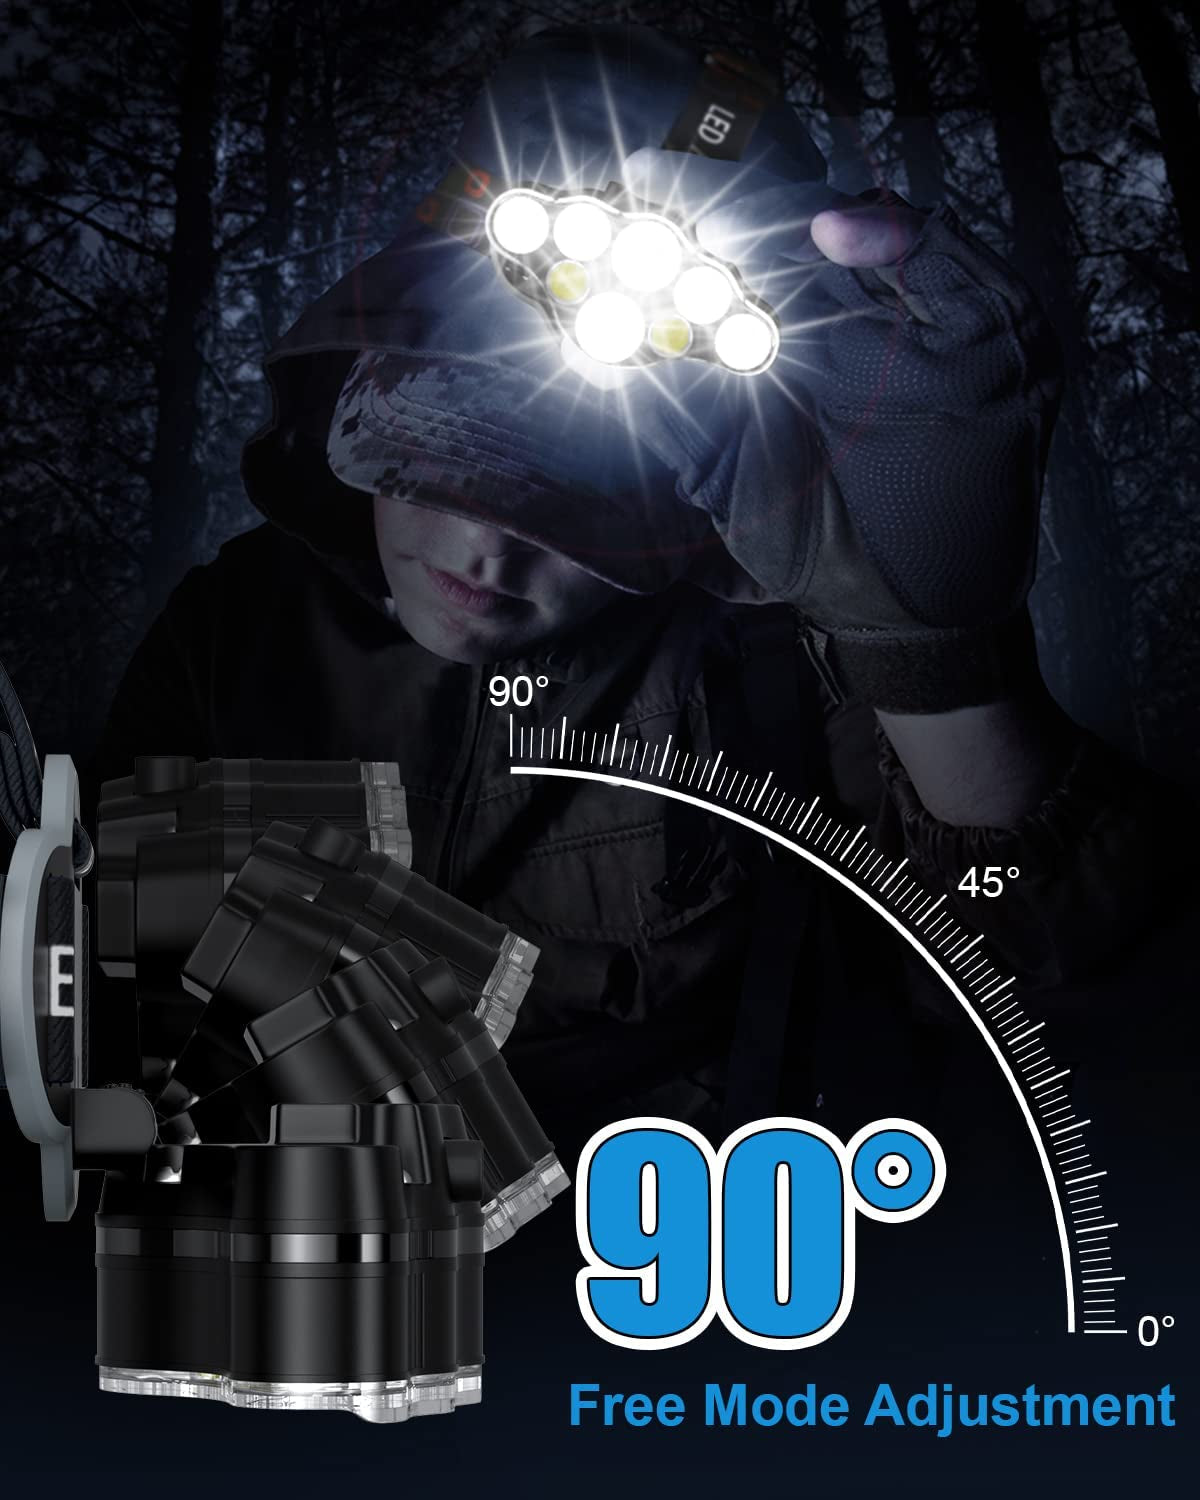 Rechargeable Headlamp, 8 LED 18000 High Lumen Bright Headlamp with Red Light, IPX4 Waterproof USB Headlight, Head Lamp, 8 Modes for Outdoor Running Hunting Hiking Camping Gear (Black)